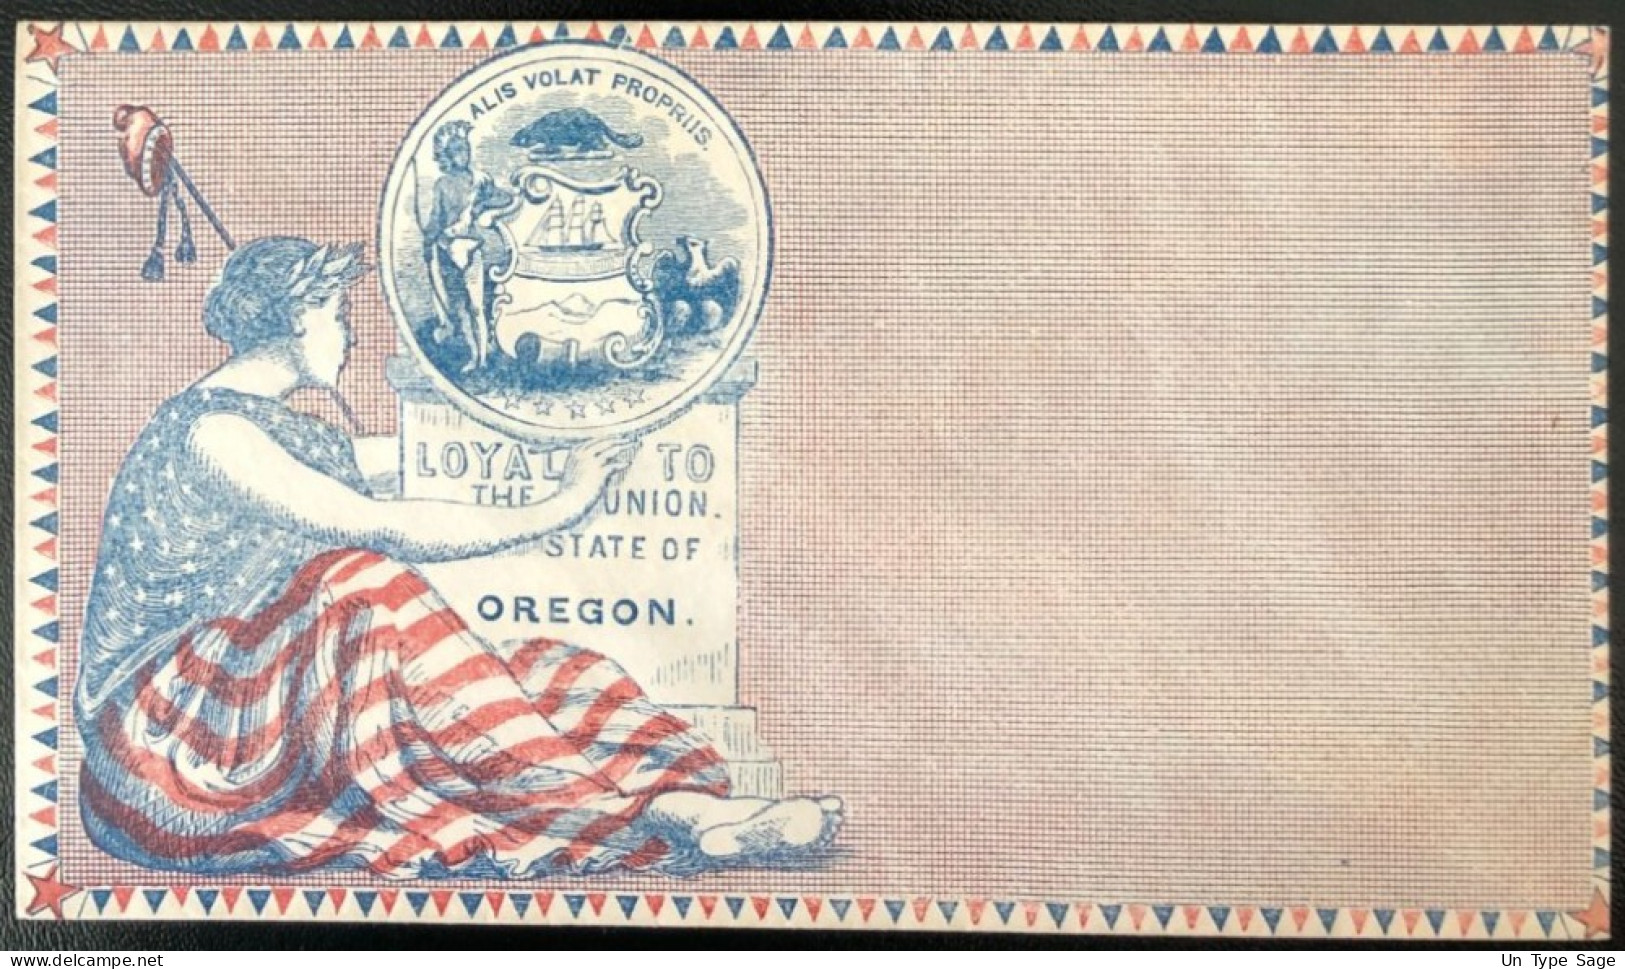 U.S.A, Civil War, Patriotic Cover - "Loyal To The Union. State Of OREGON" - Unused - (C455) - Marcofilie